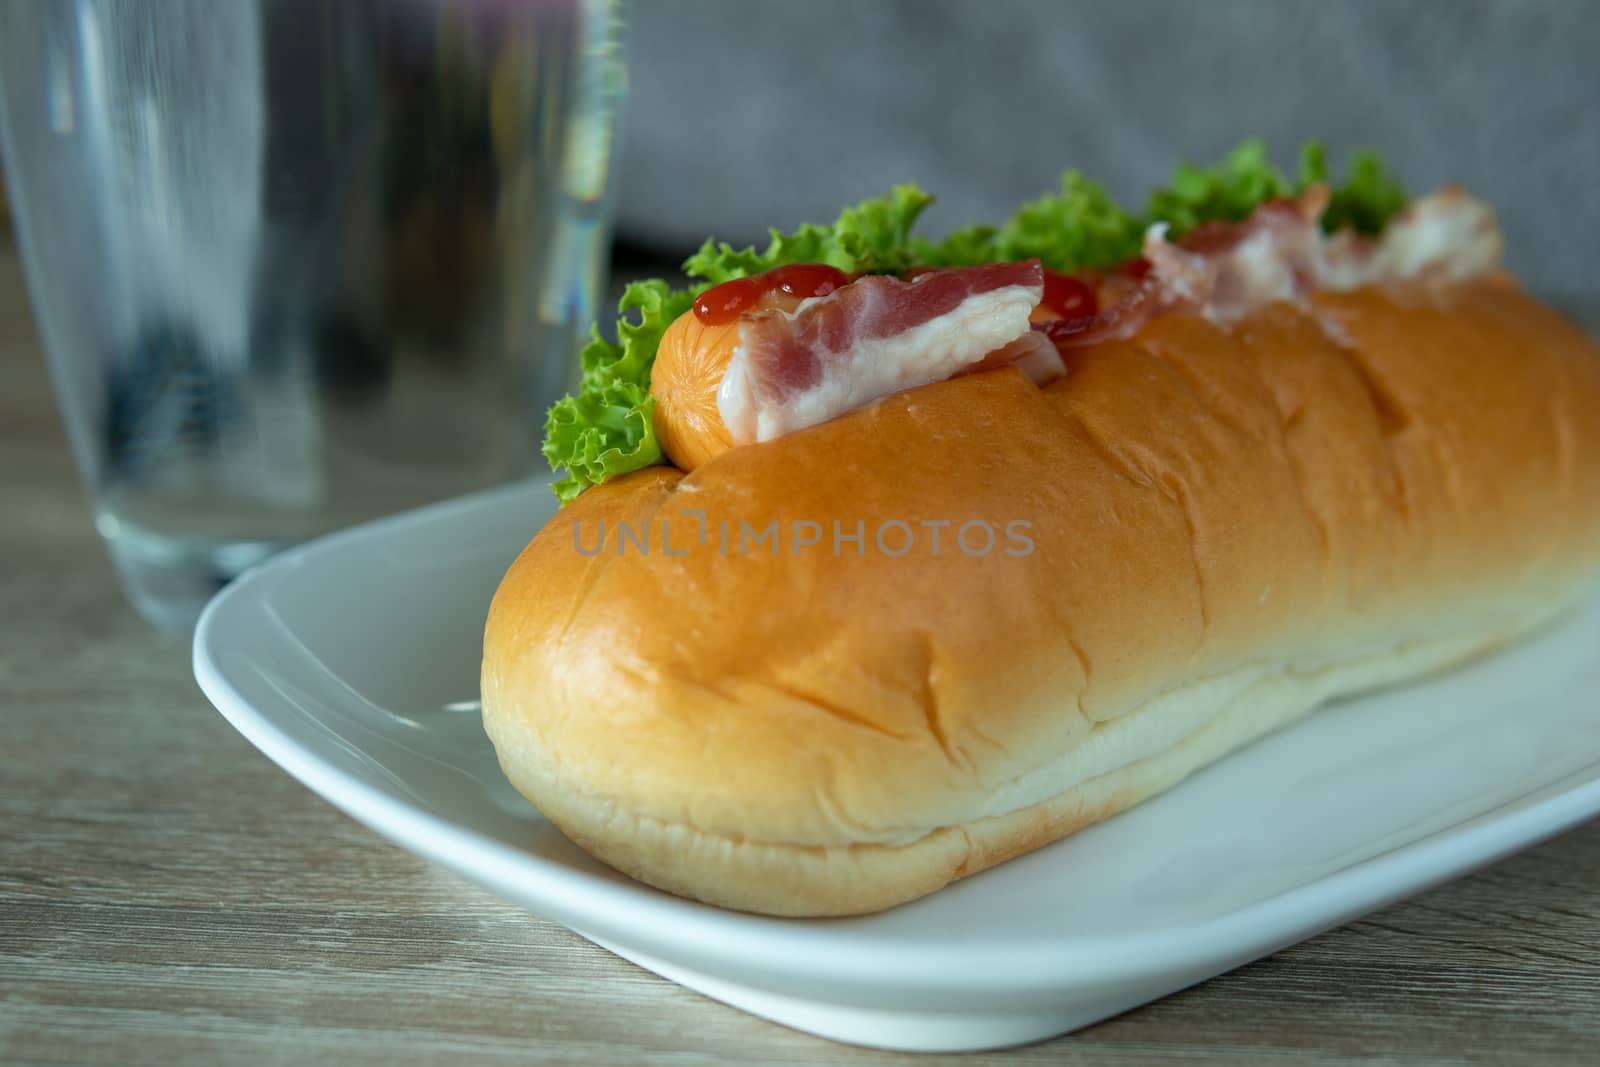 Ham sausage sandwich topped with ketchup on a white plate on the table, simple food